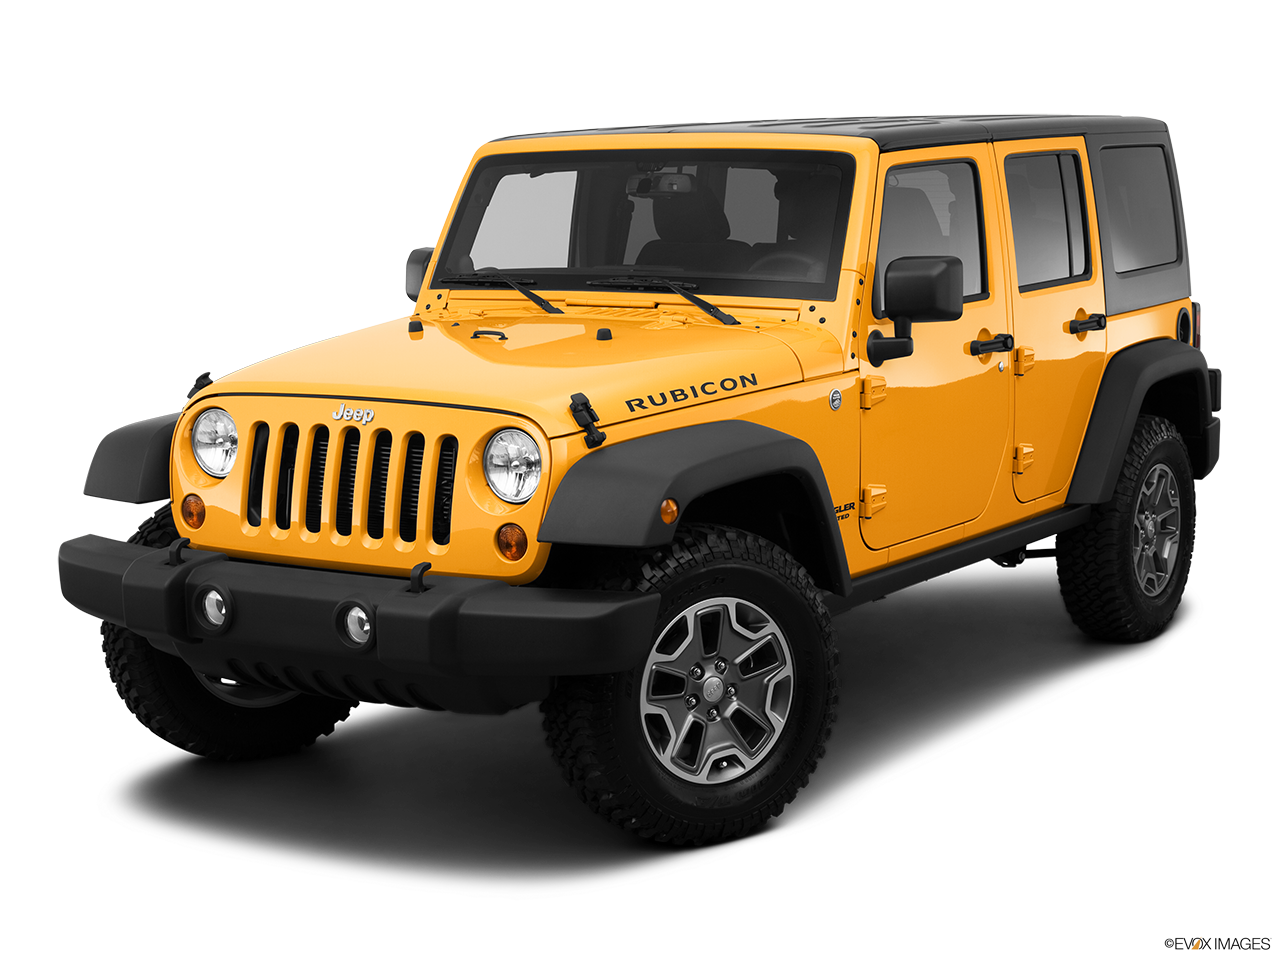 2018 Jeep Wrangler JK Unlimited Rubicon: The First Three Years –